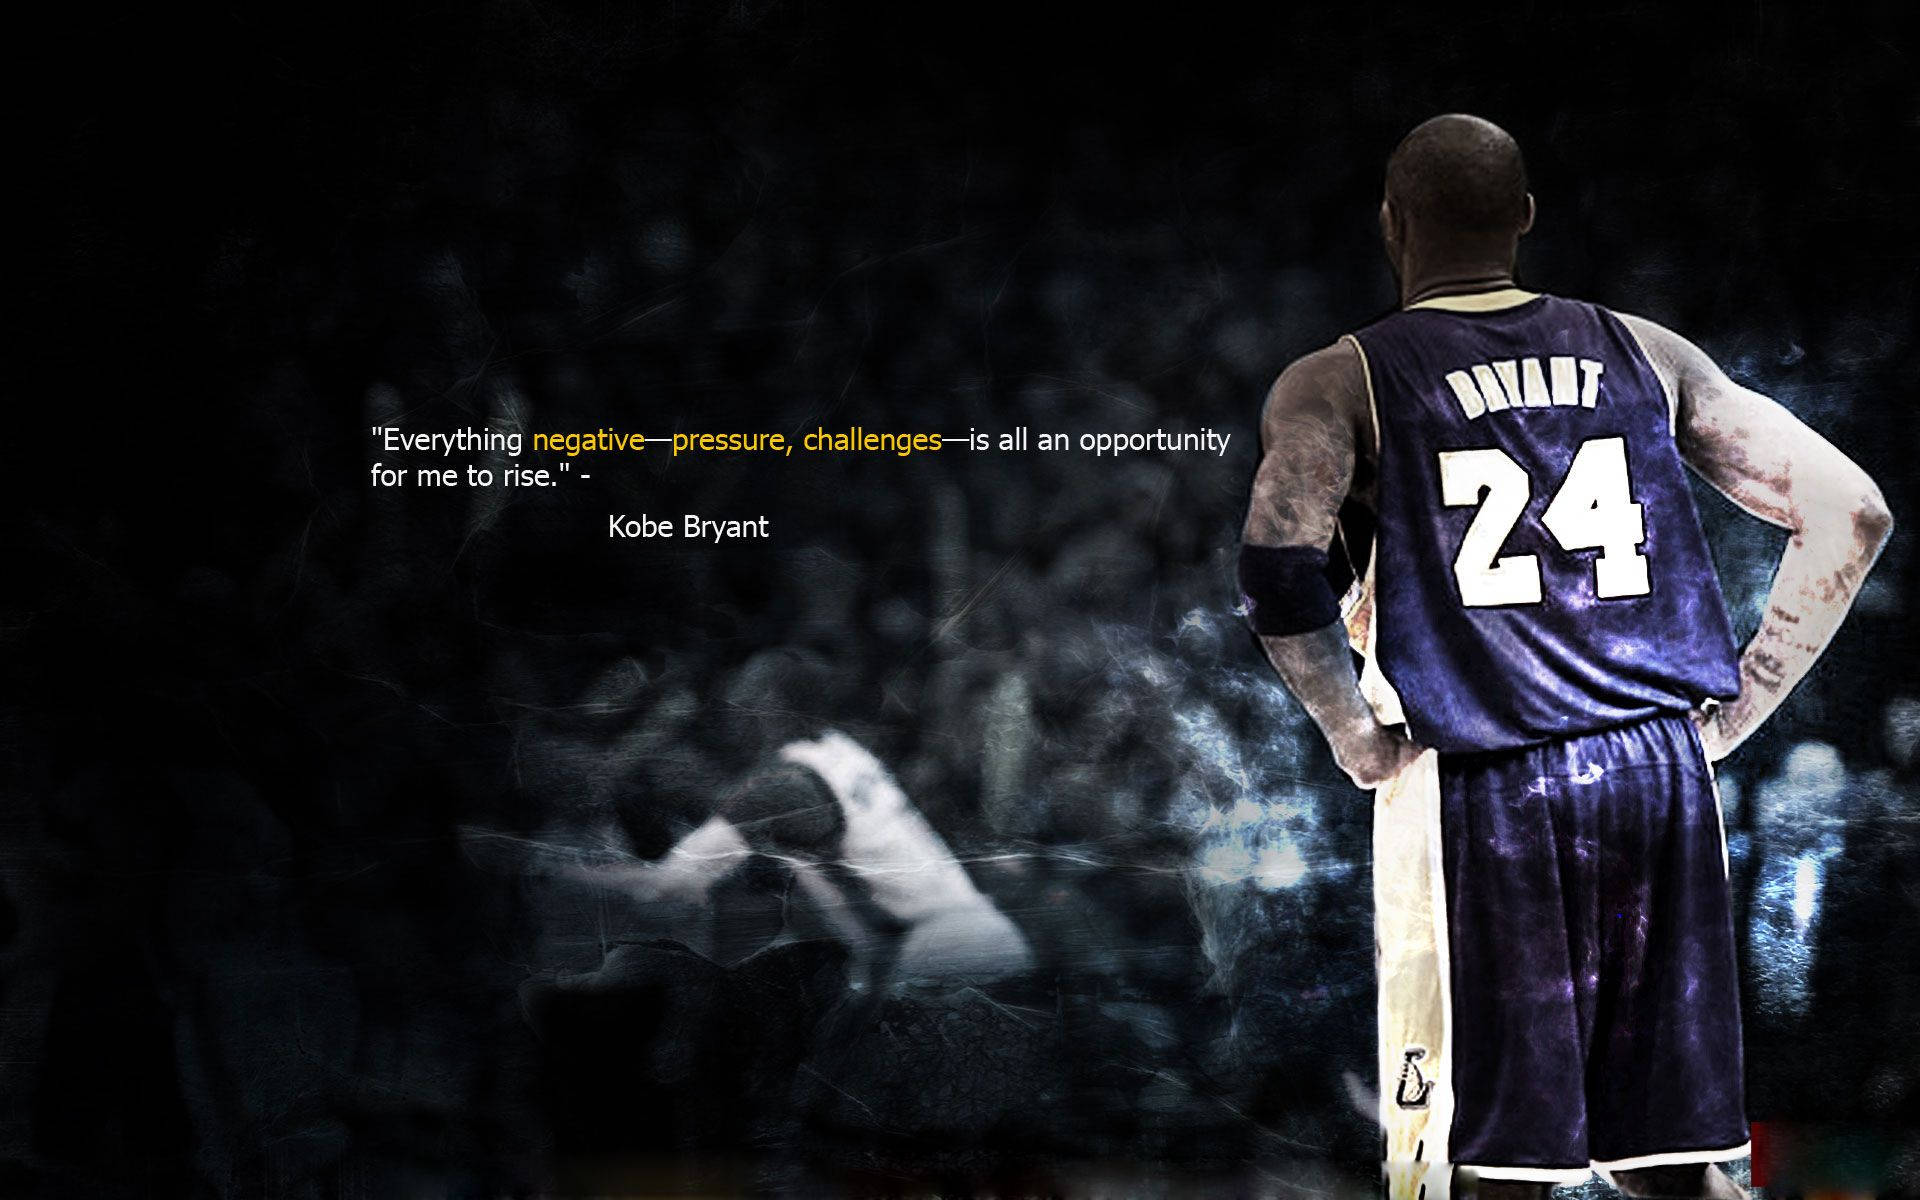 ▷ 1001+ ideas for a Kobe Bryant Wallpaper To Honor The Legend  Kobe bryant  pictures, Kobe bryant wallpaper, Basketball pictures